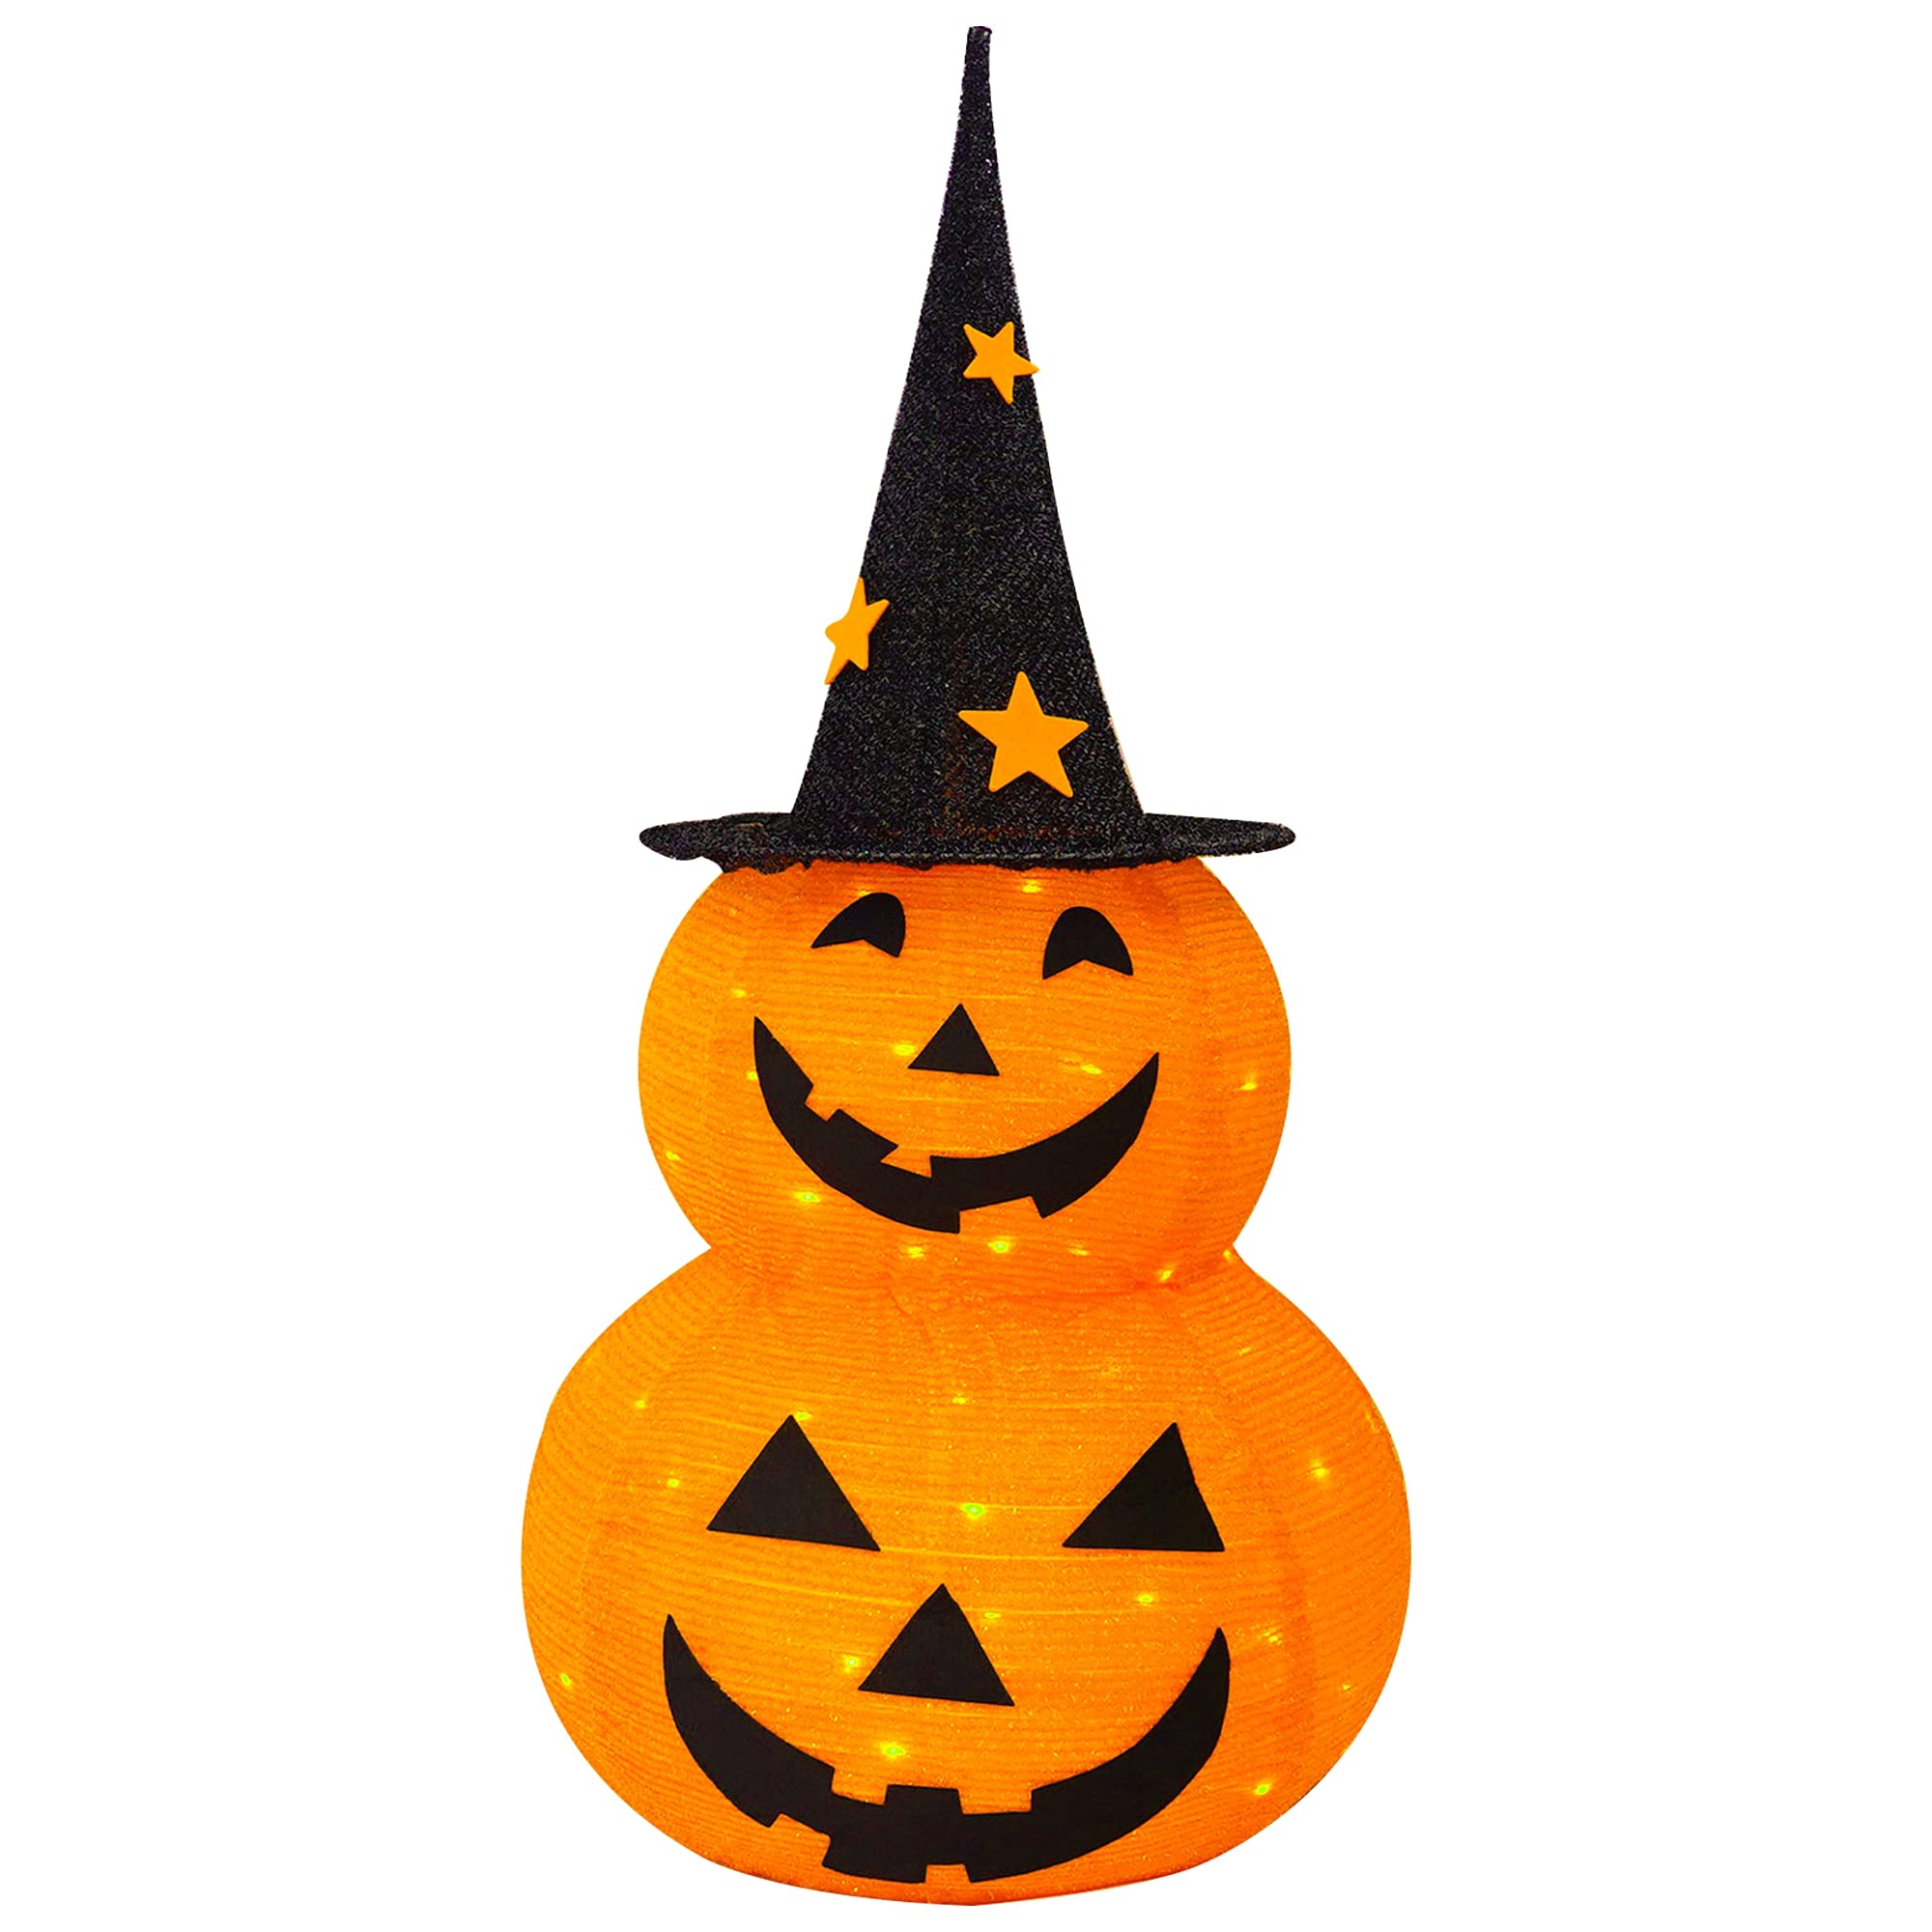 FUNPENY 3FT Halloween Collapsible Pumpkin Decorations, Pre-Lit Light Up 50 LED Pumpkin with Star Hat 8 Lighted Mode, Pop Up Jack